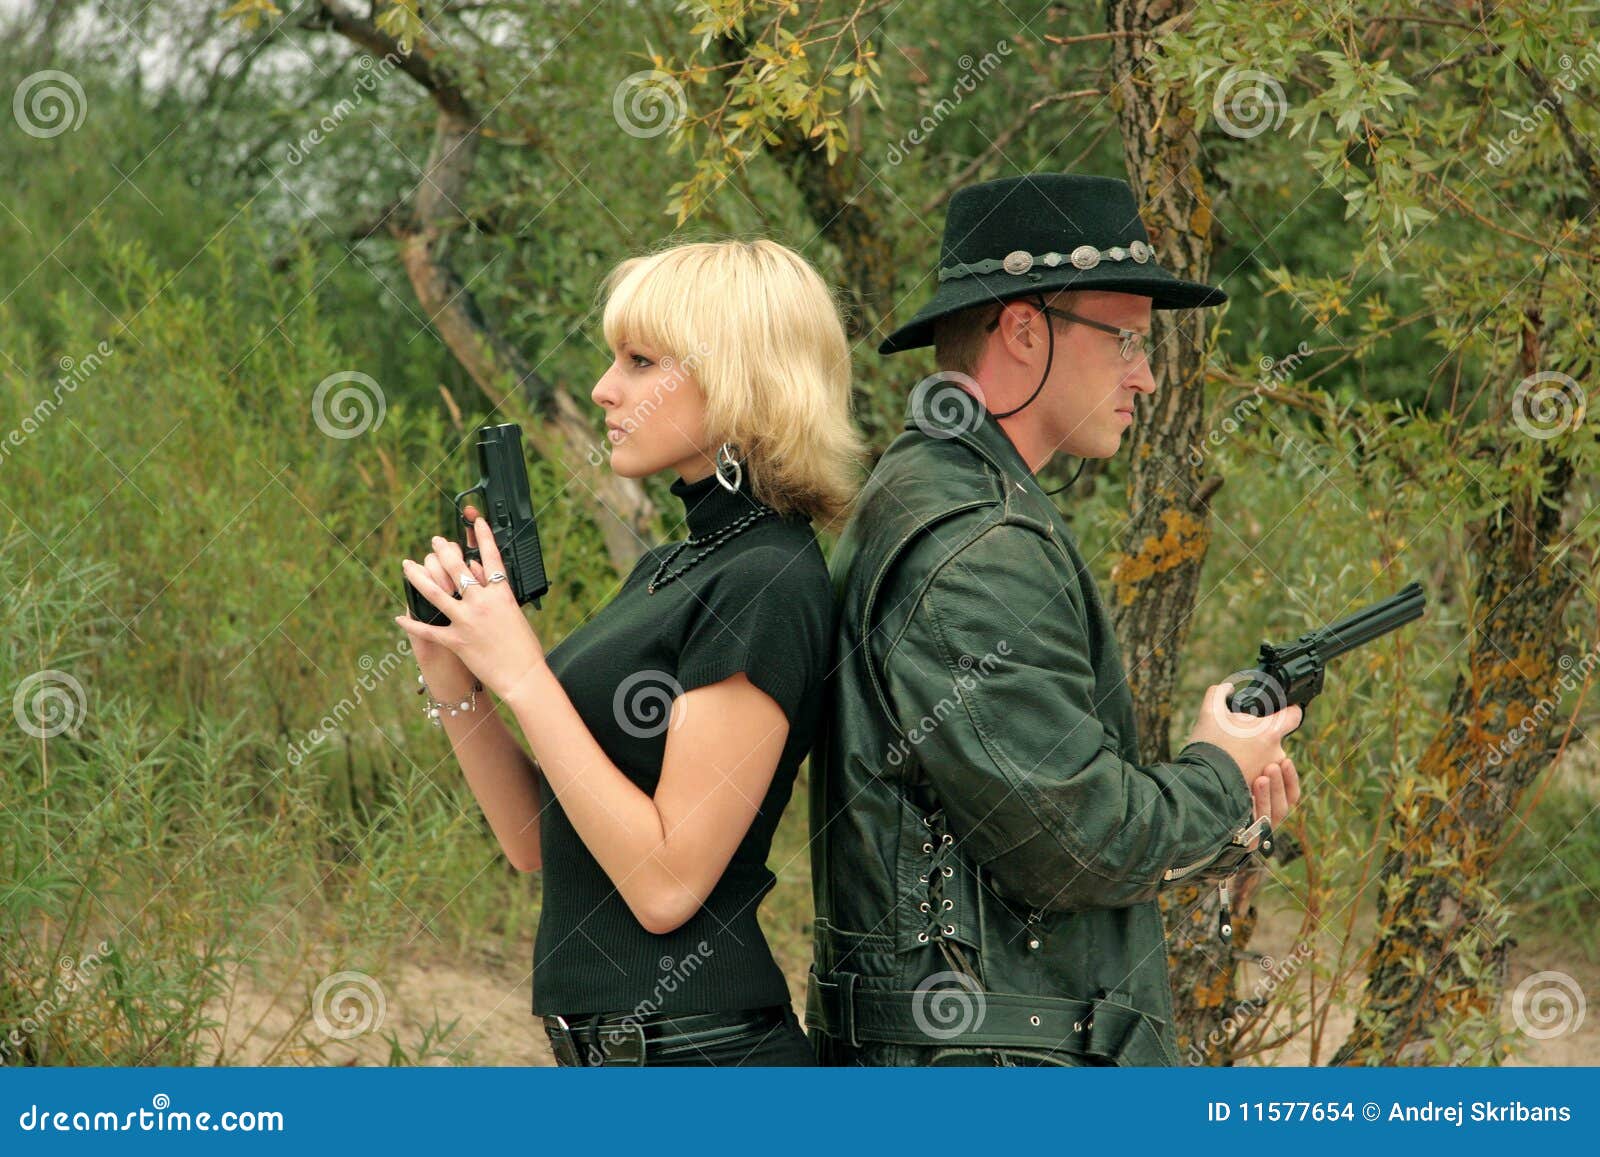 Two people with guns stock photo. Image of crime, elegance 